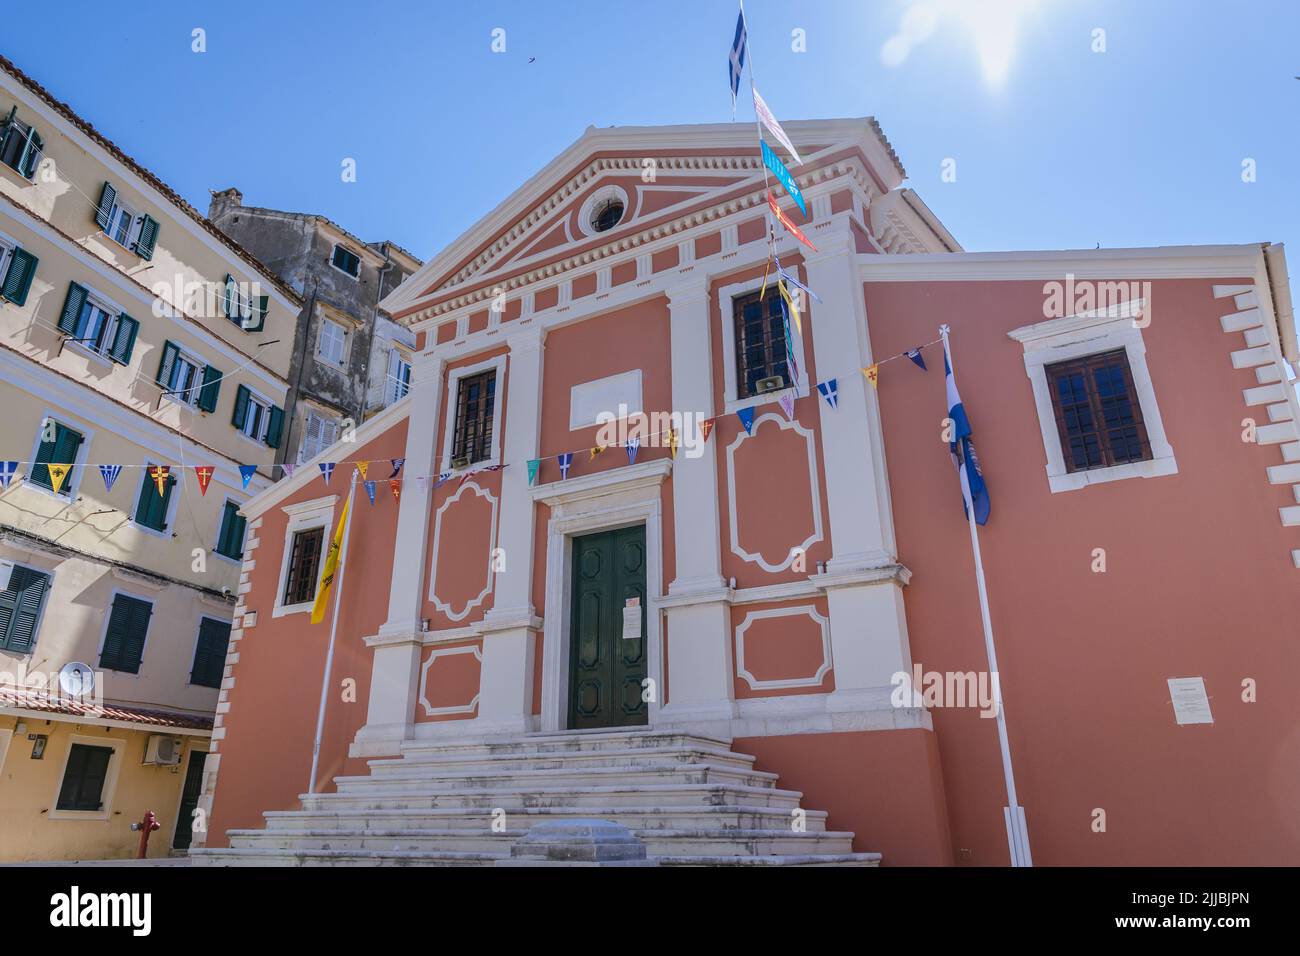 Holy Church of the Holy Fathers and Saint Arsenios on Old Town of Corfu city on the island of Corfu, Ionian Islands, Greece Stock Photo